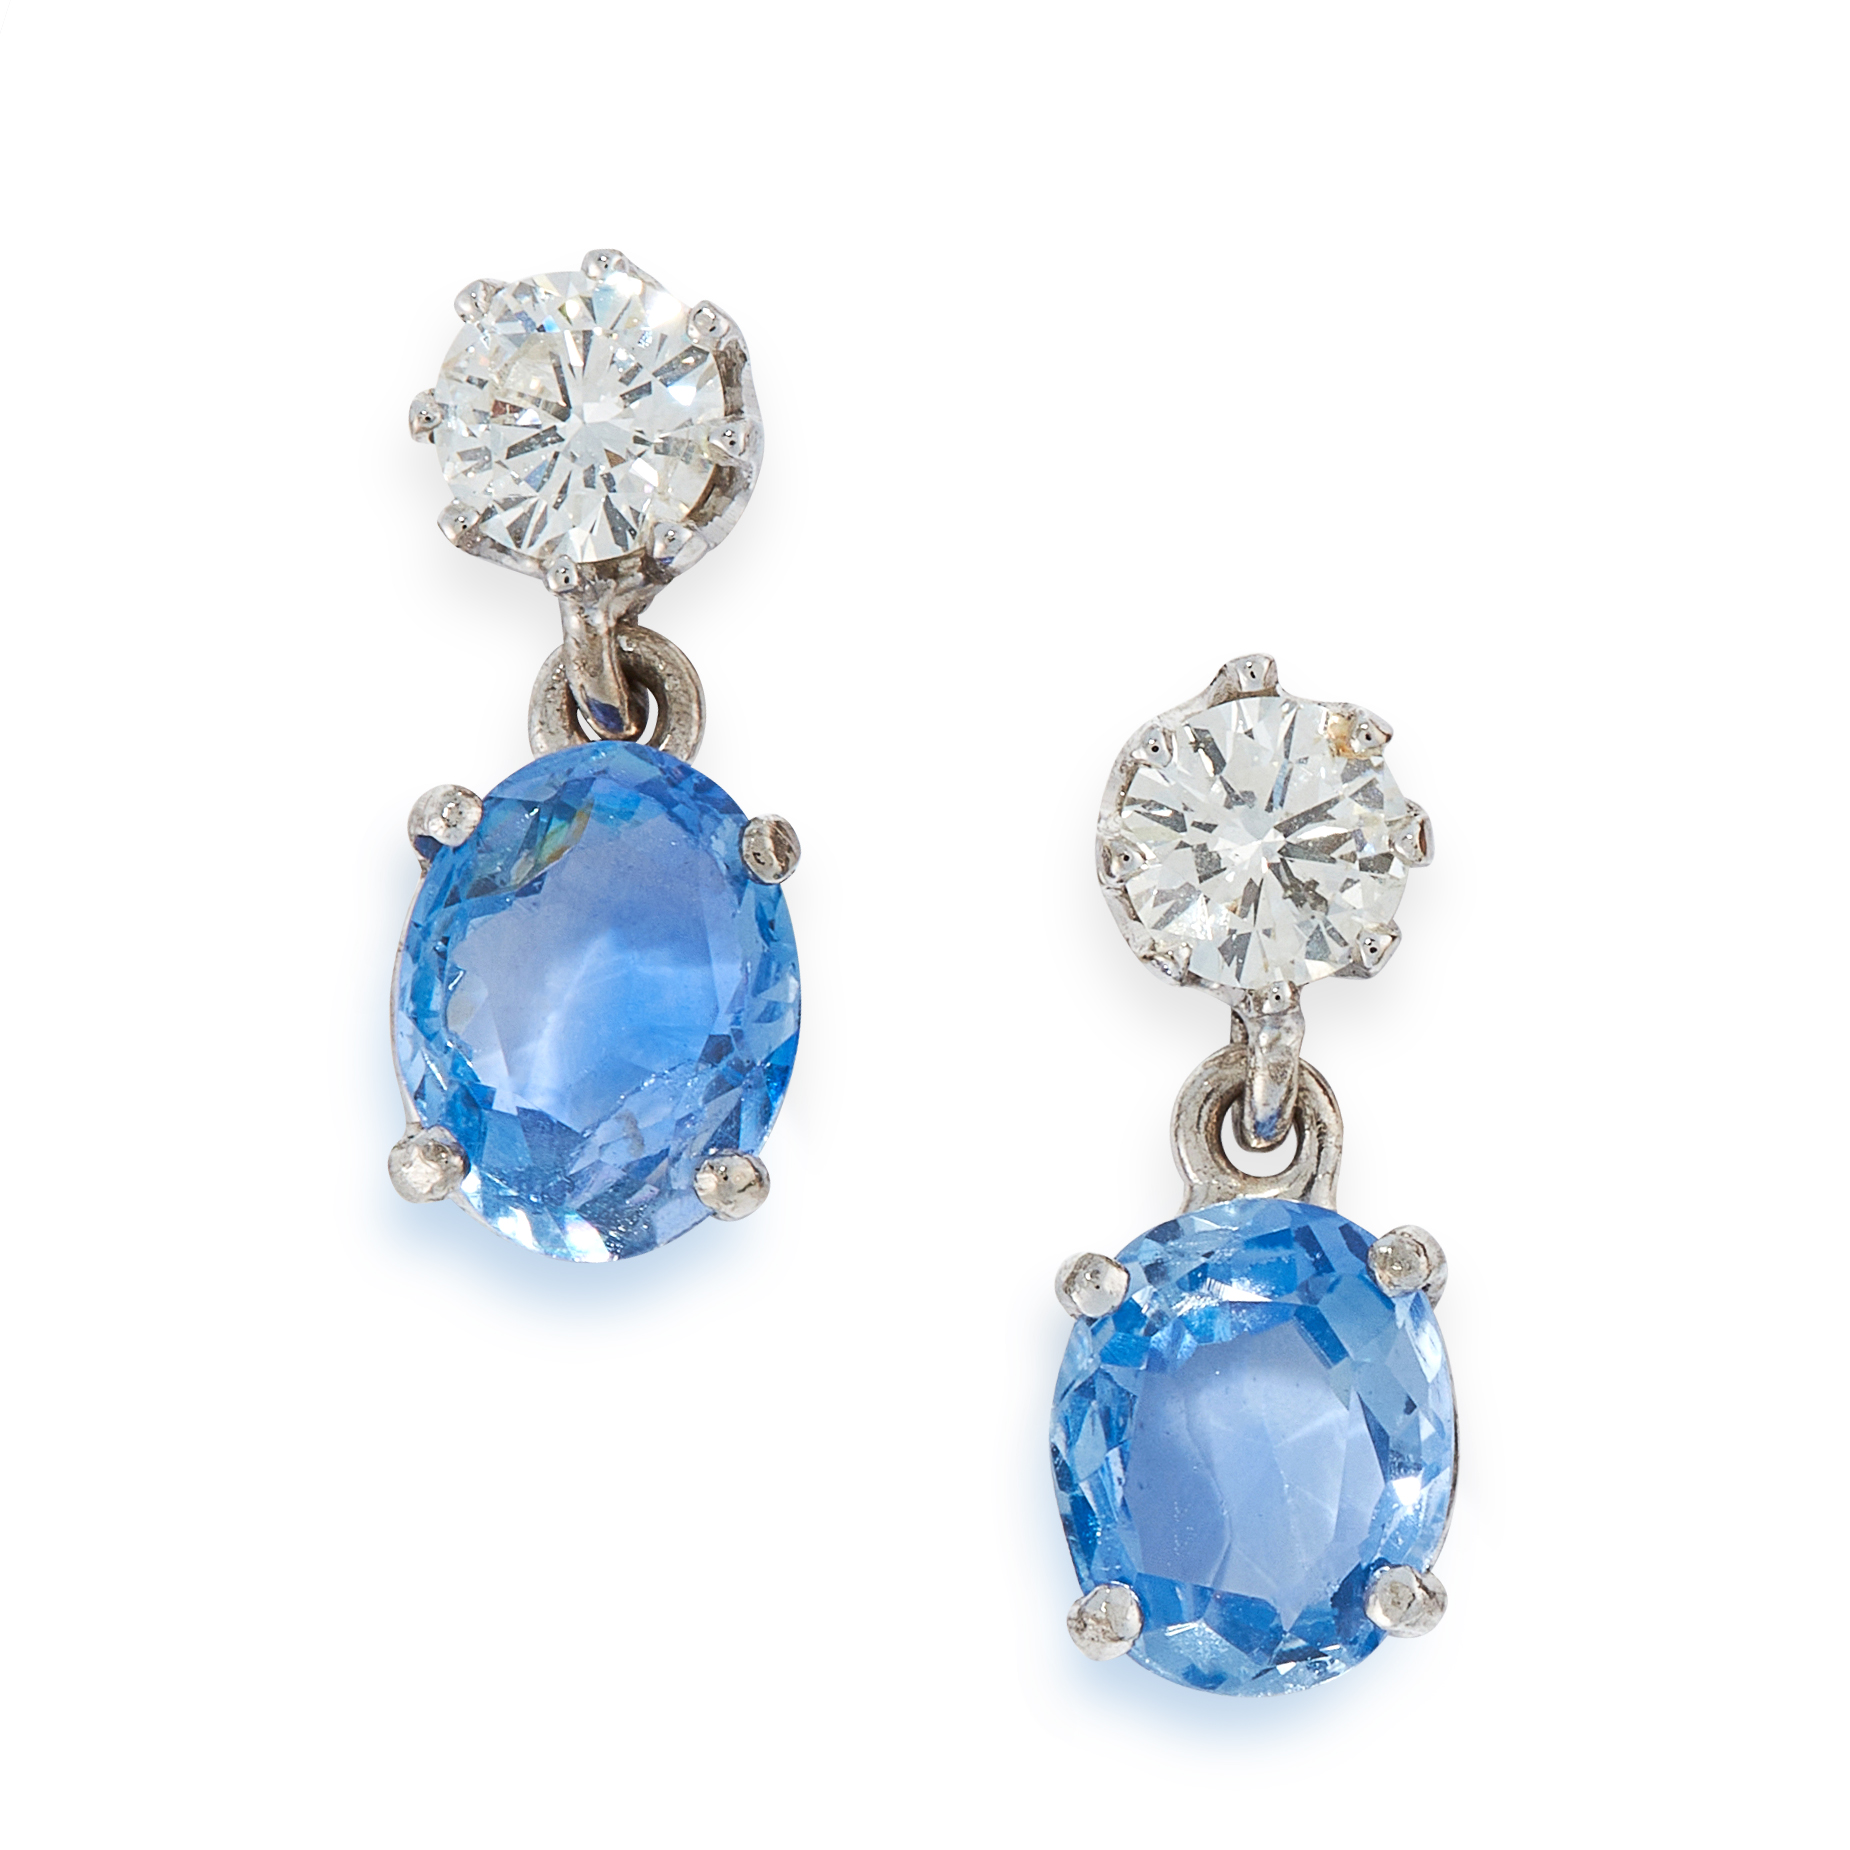 A PAIR OF SAPPHIRE AND DIAMOND EARRINGS each set with an oval cut blue sapphire of 1.35 and 1.08